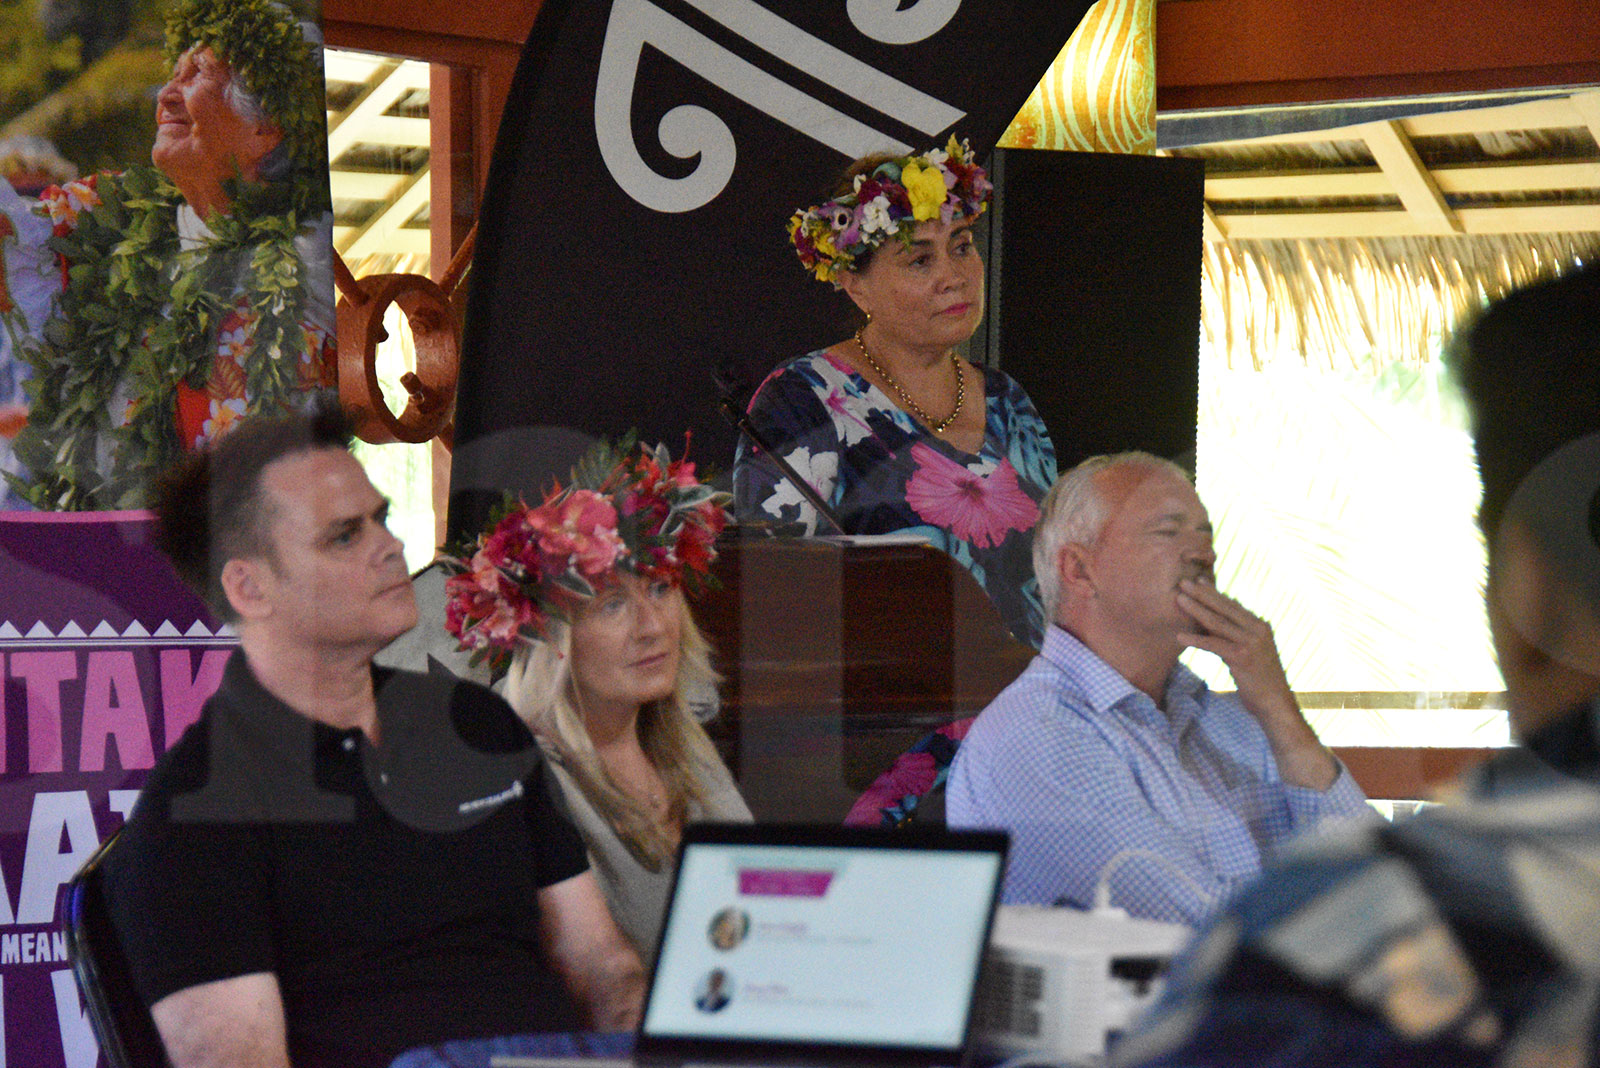 More dialogue and partnership needed between Air New Zealand and the Cooks tourism industry